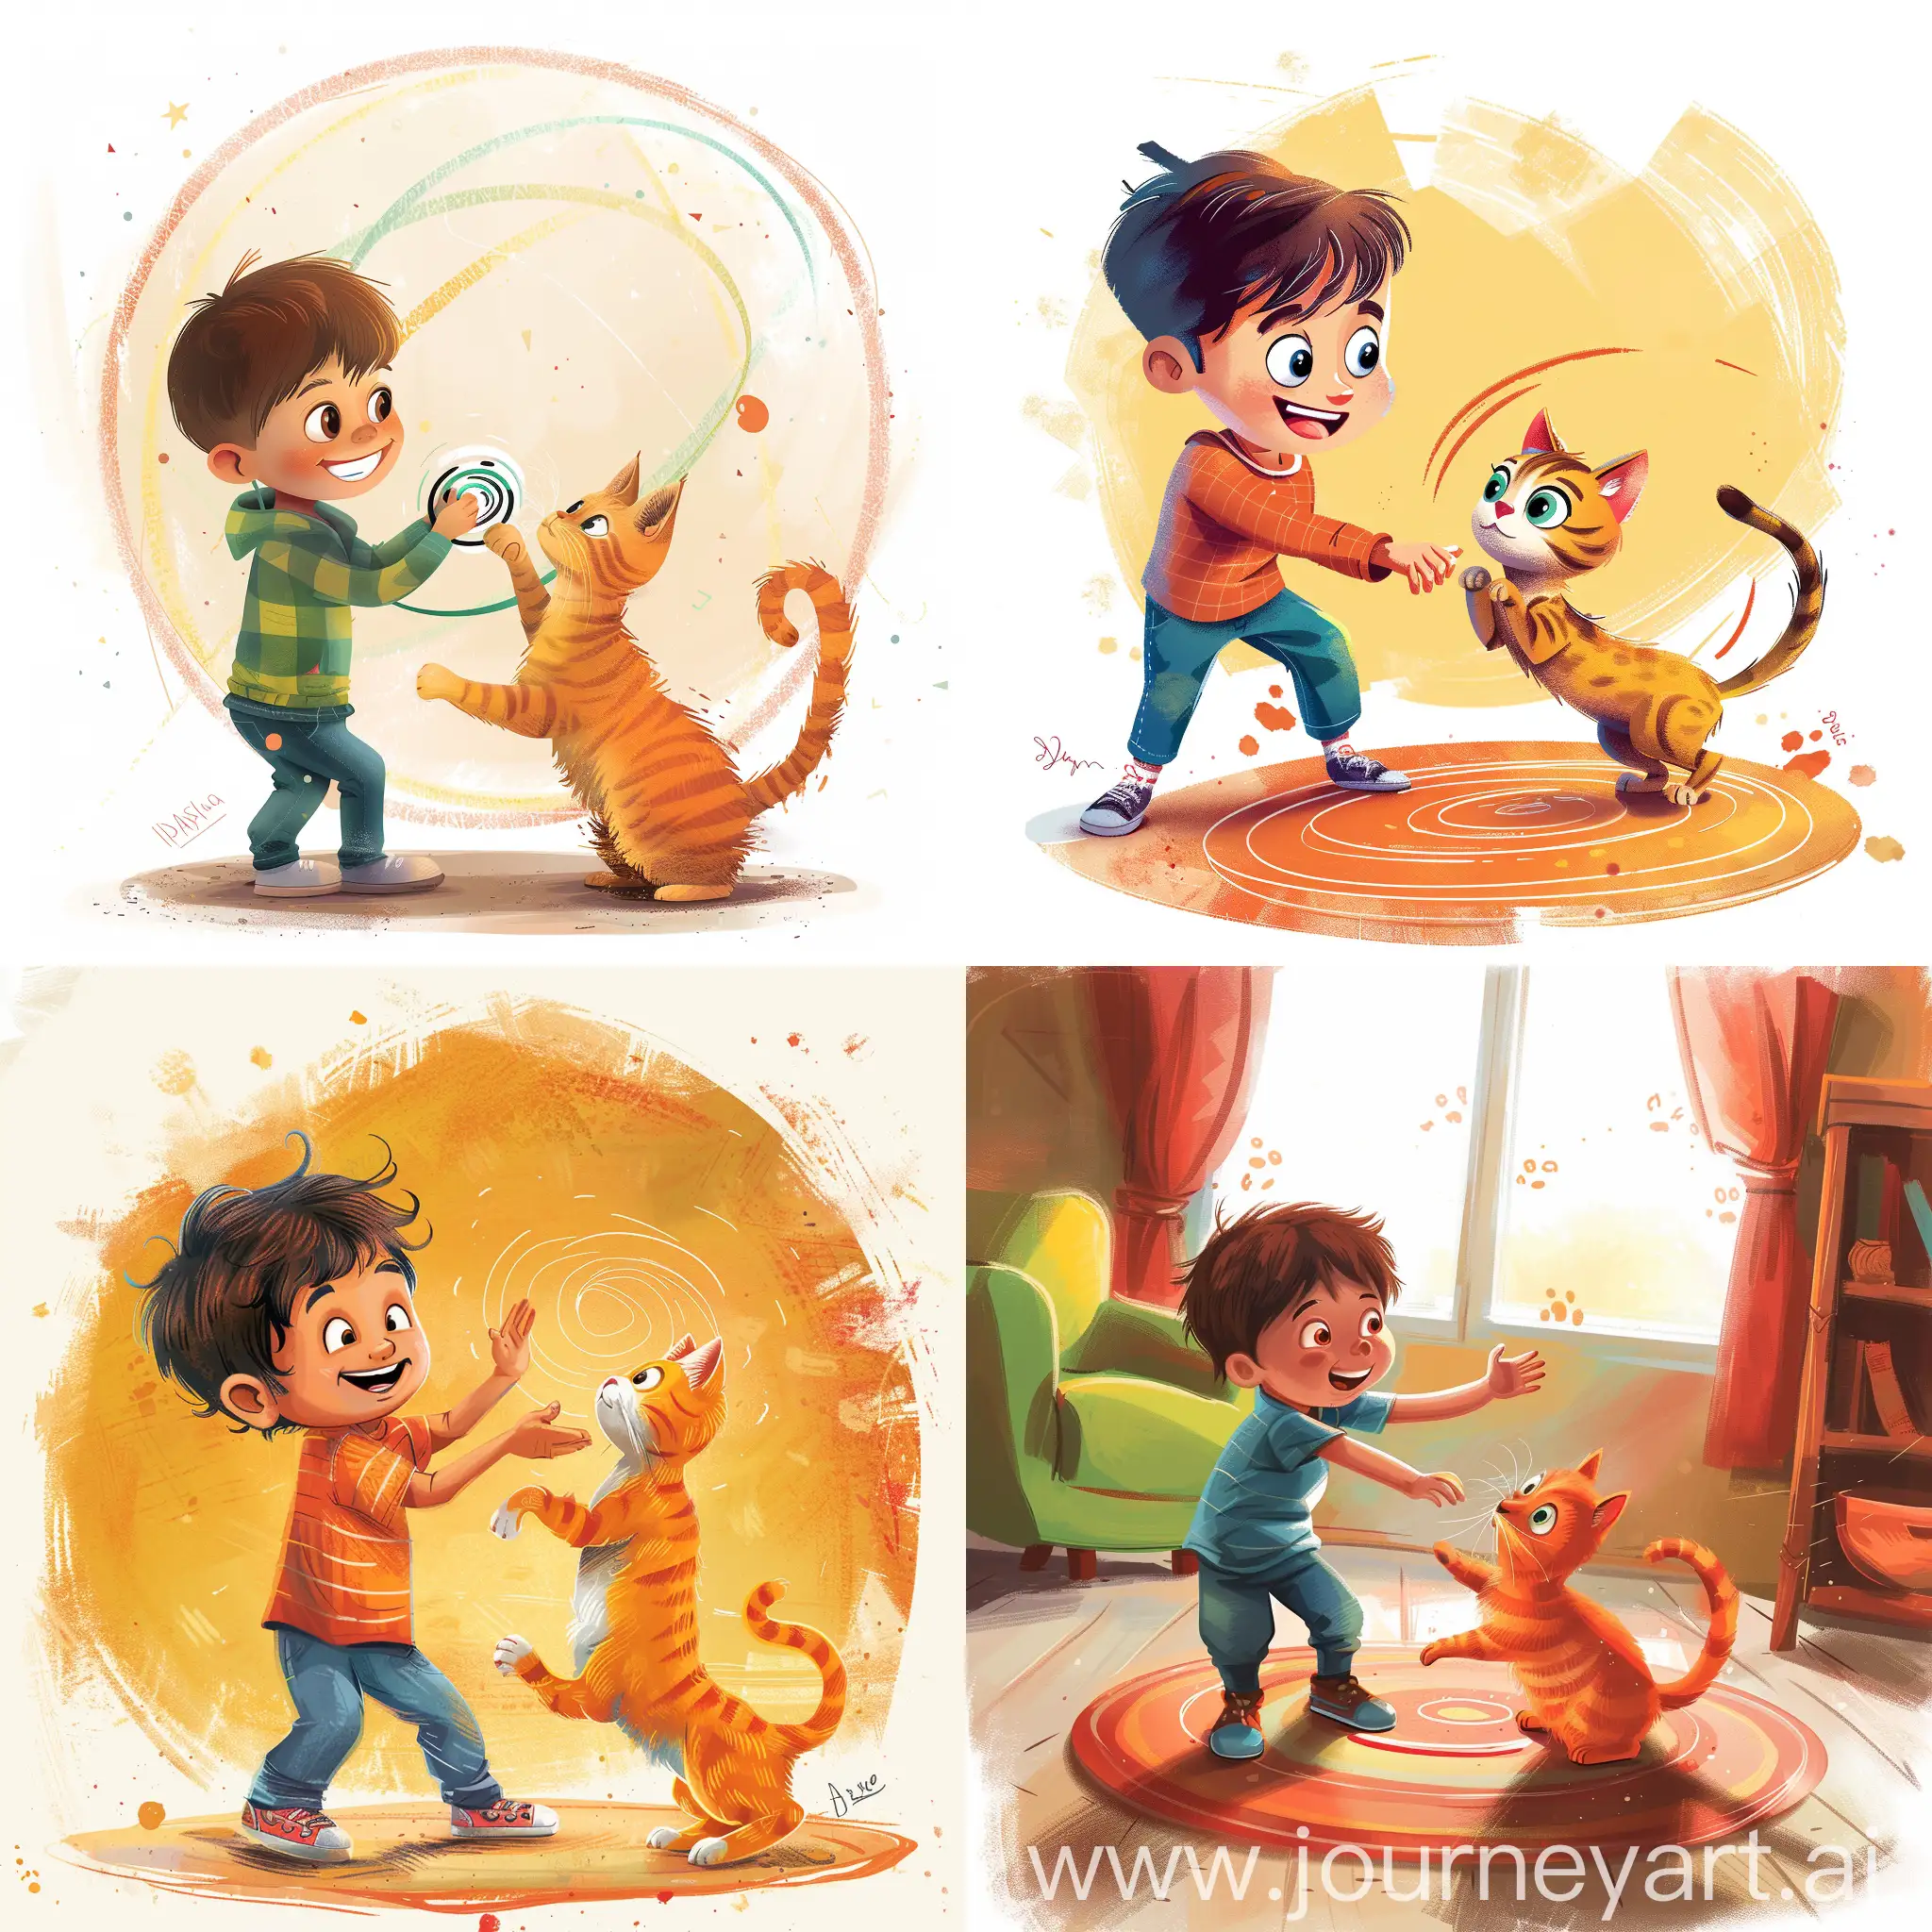 Adorable-4YearOld-Boy-Teaching-Cat-to-Spin-Vibrant-and-Whimsical-Childrens-Book-Illustration